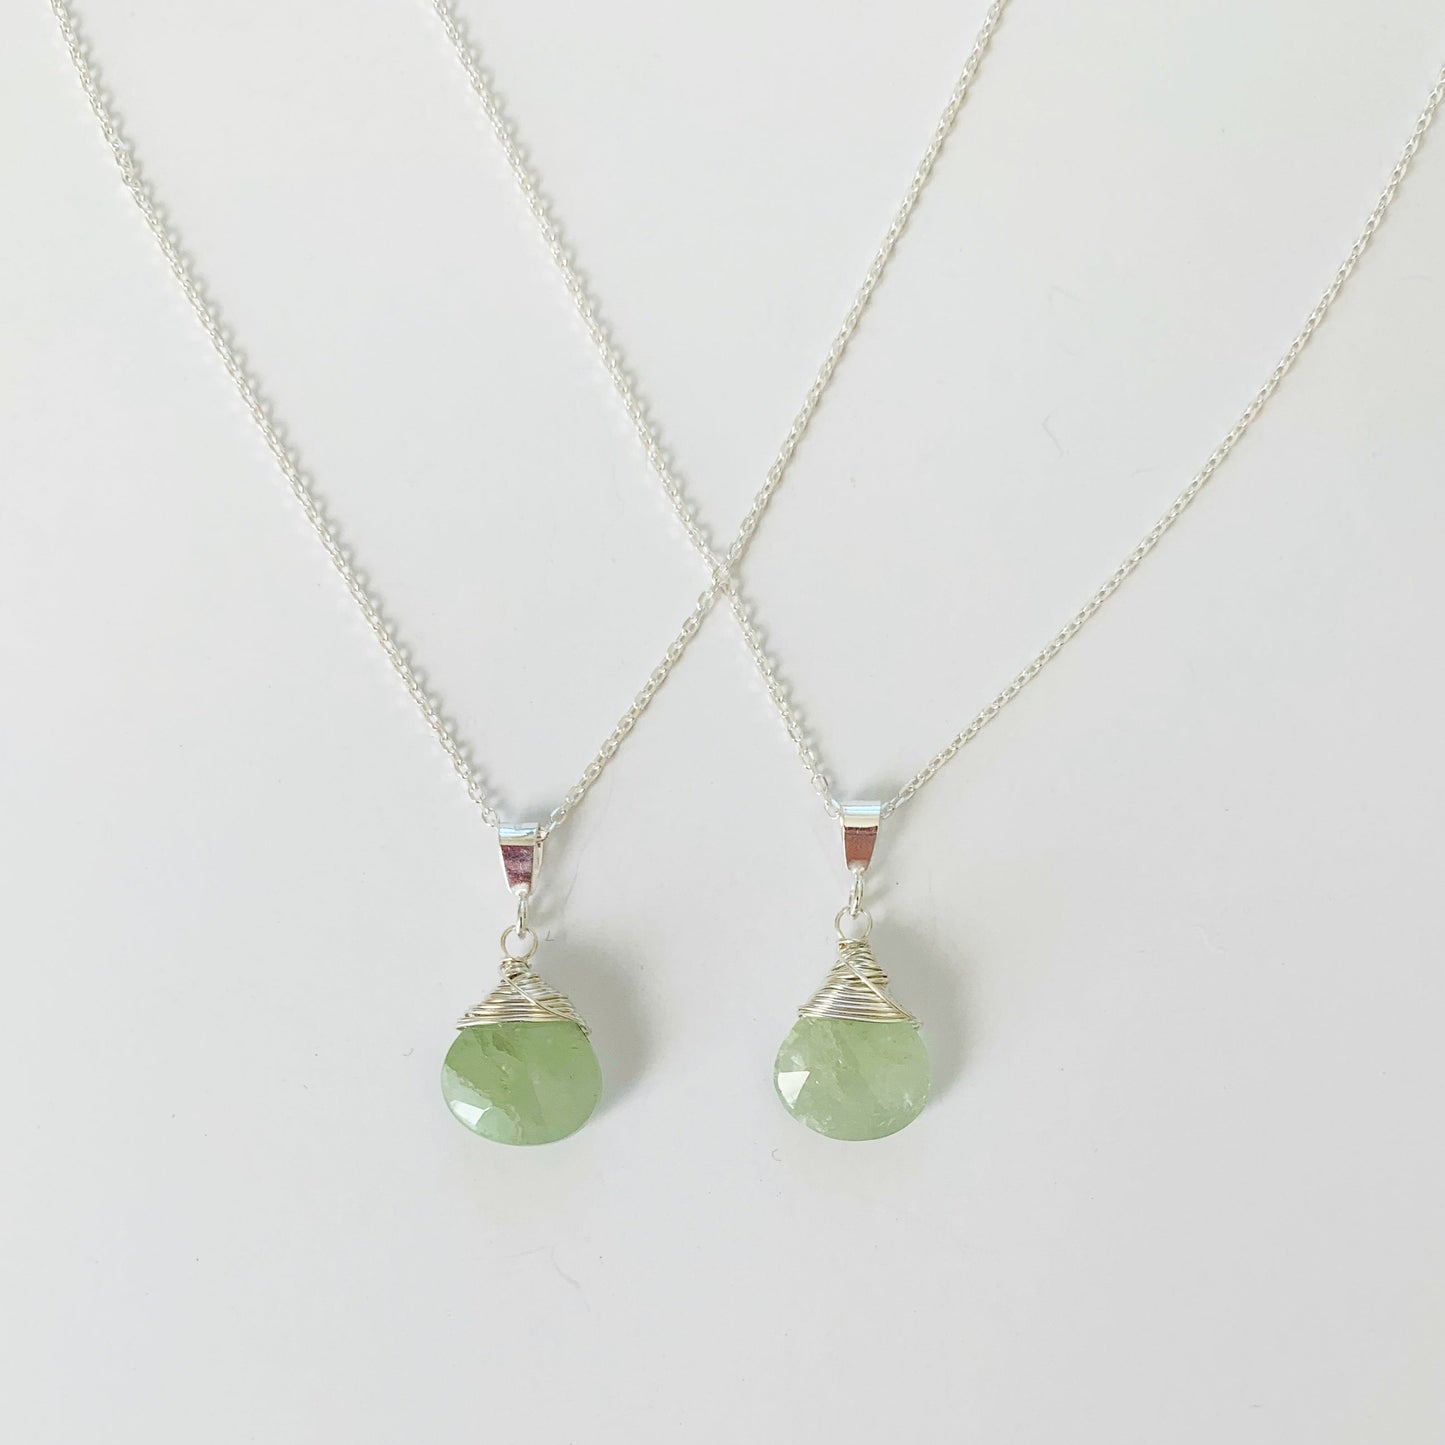 2 raindrop wire wrapped necklaces in sterling silver and aquamarine pictured on a white surface